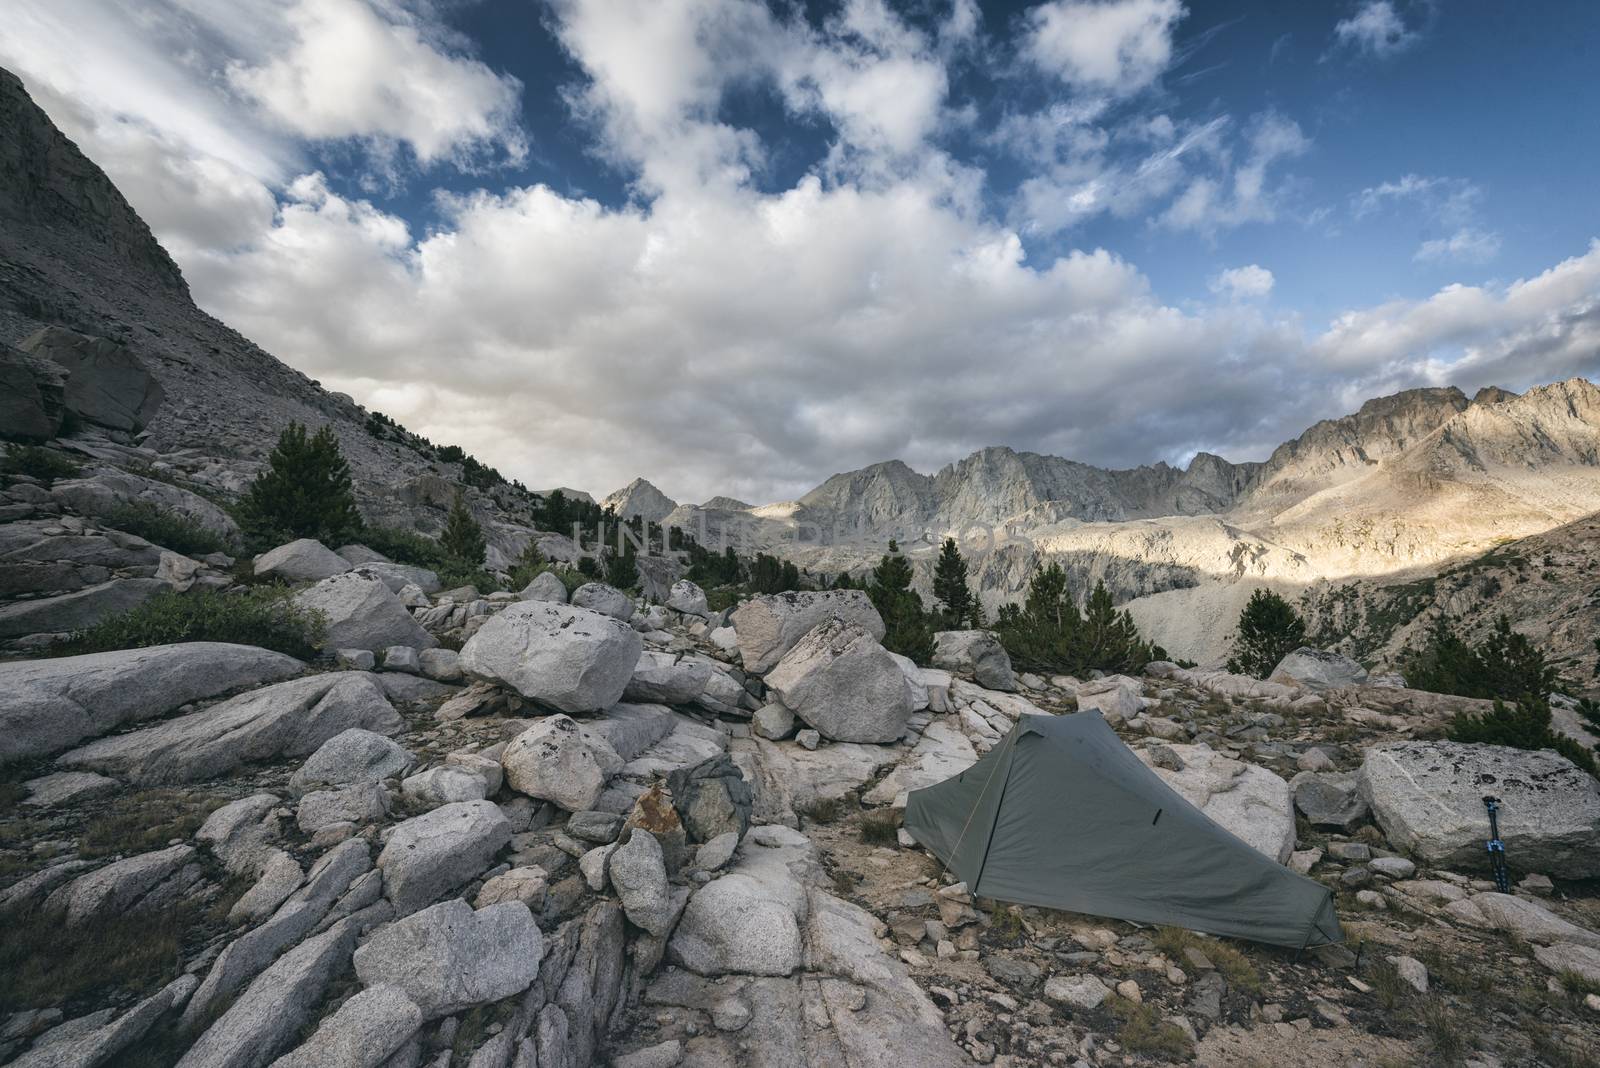 Camping in the Sierra Nevada Mountains  by patricklienin